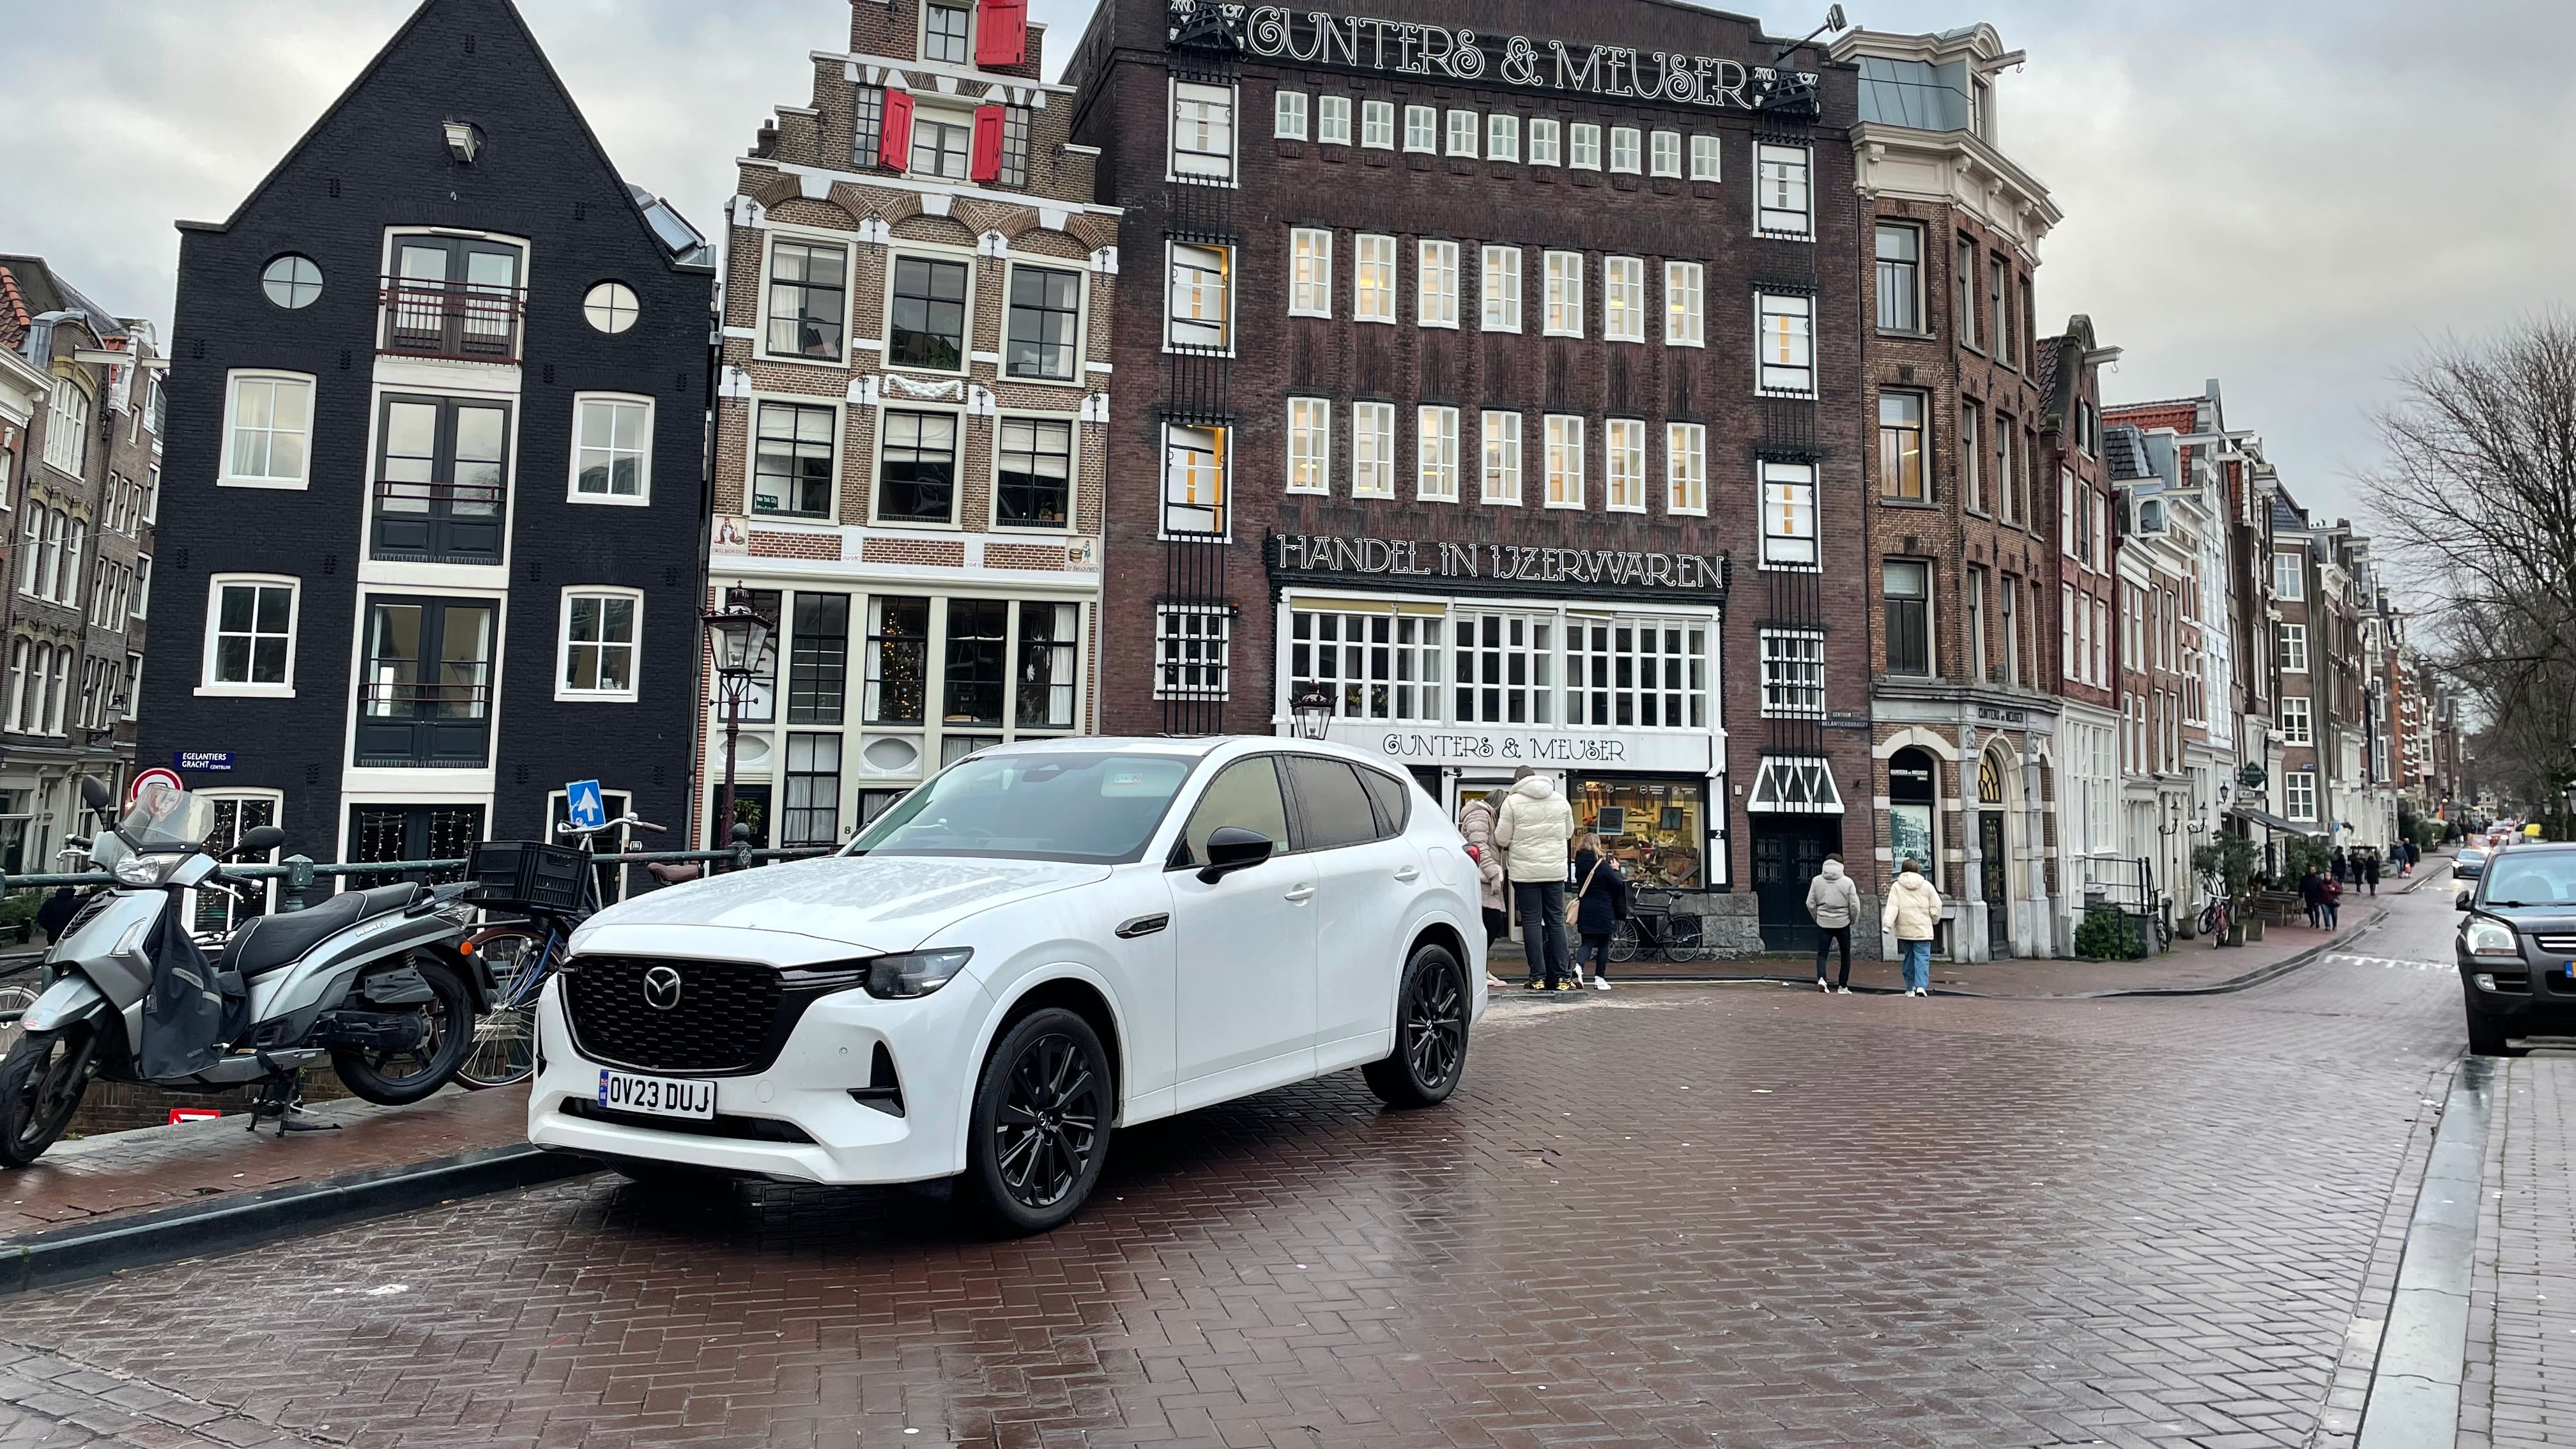 The CX-60 certainly felt large around the streets of Amsterdam